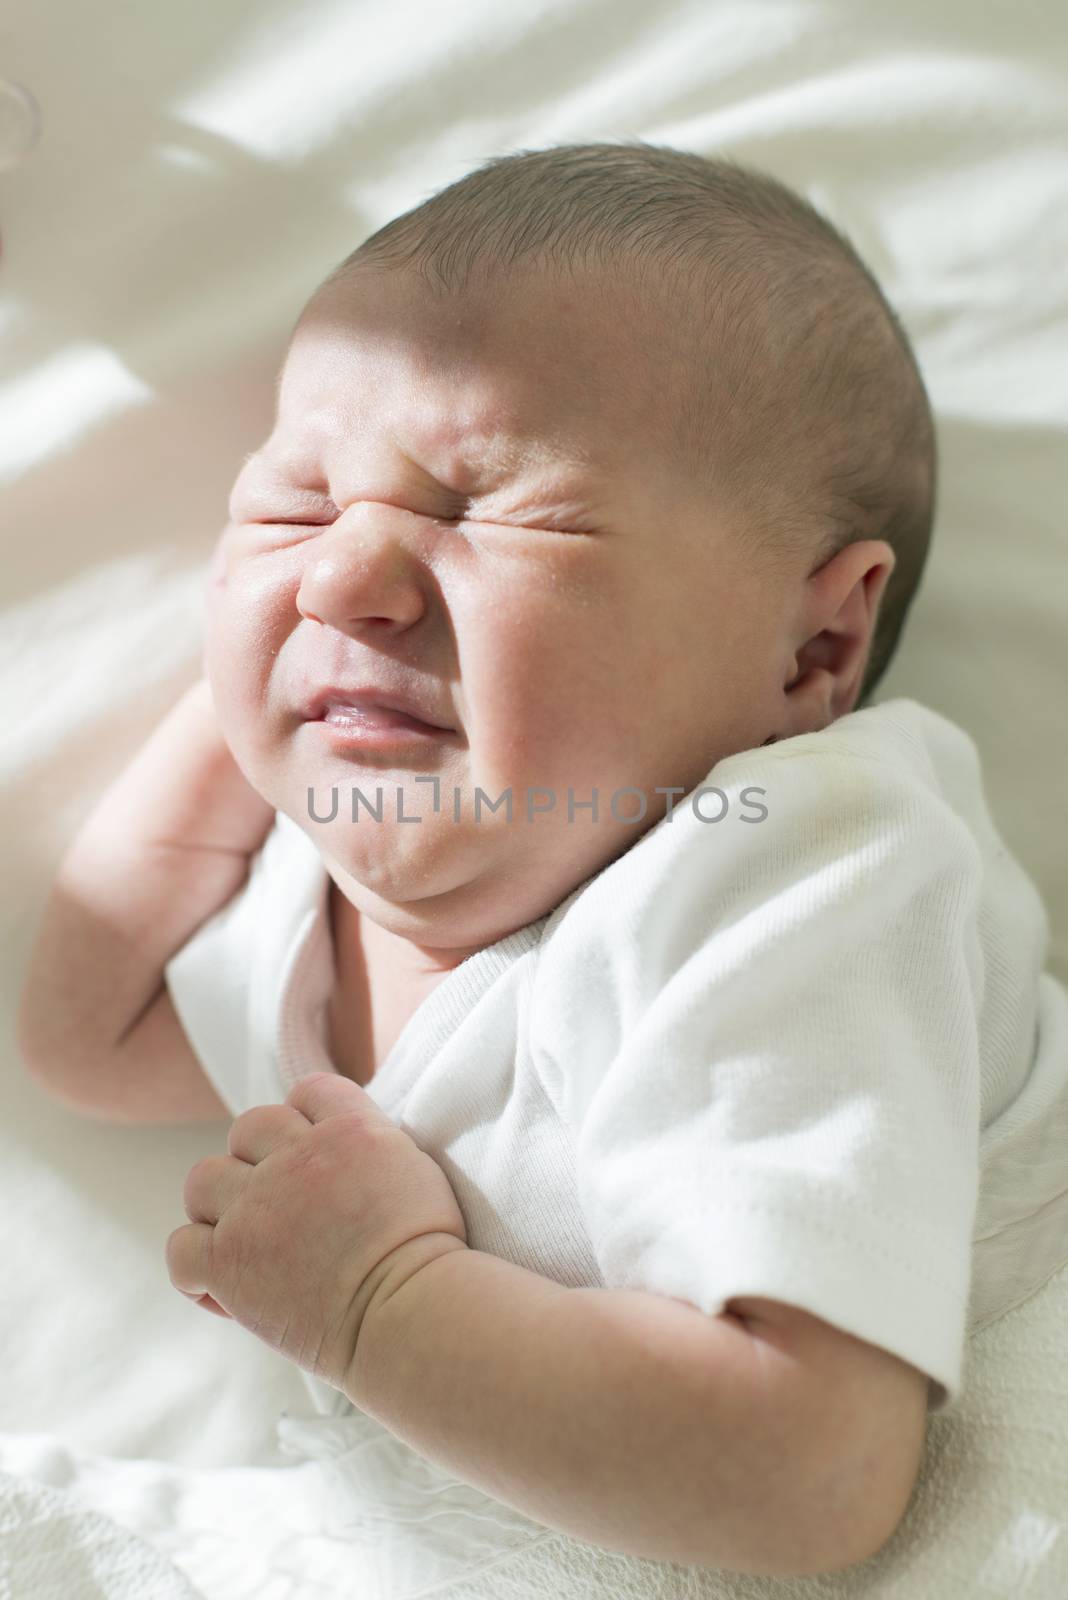 Unhappy frowning baby. White clothes